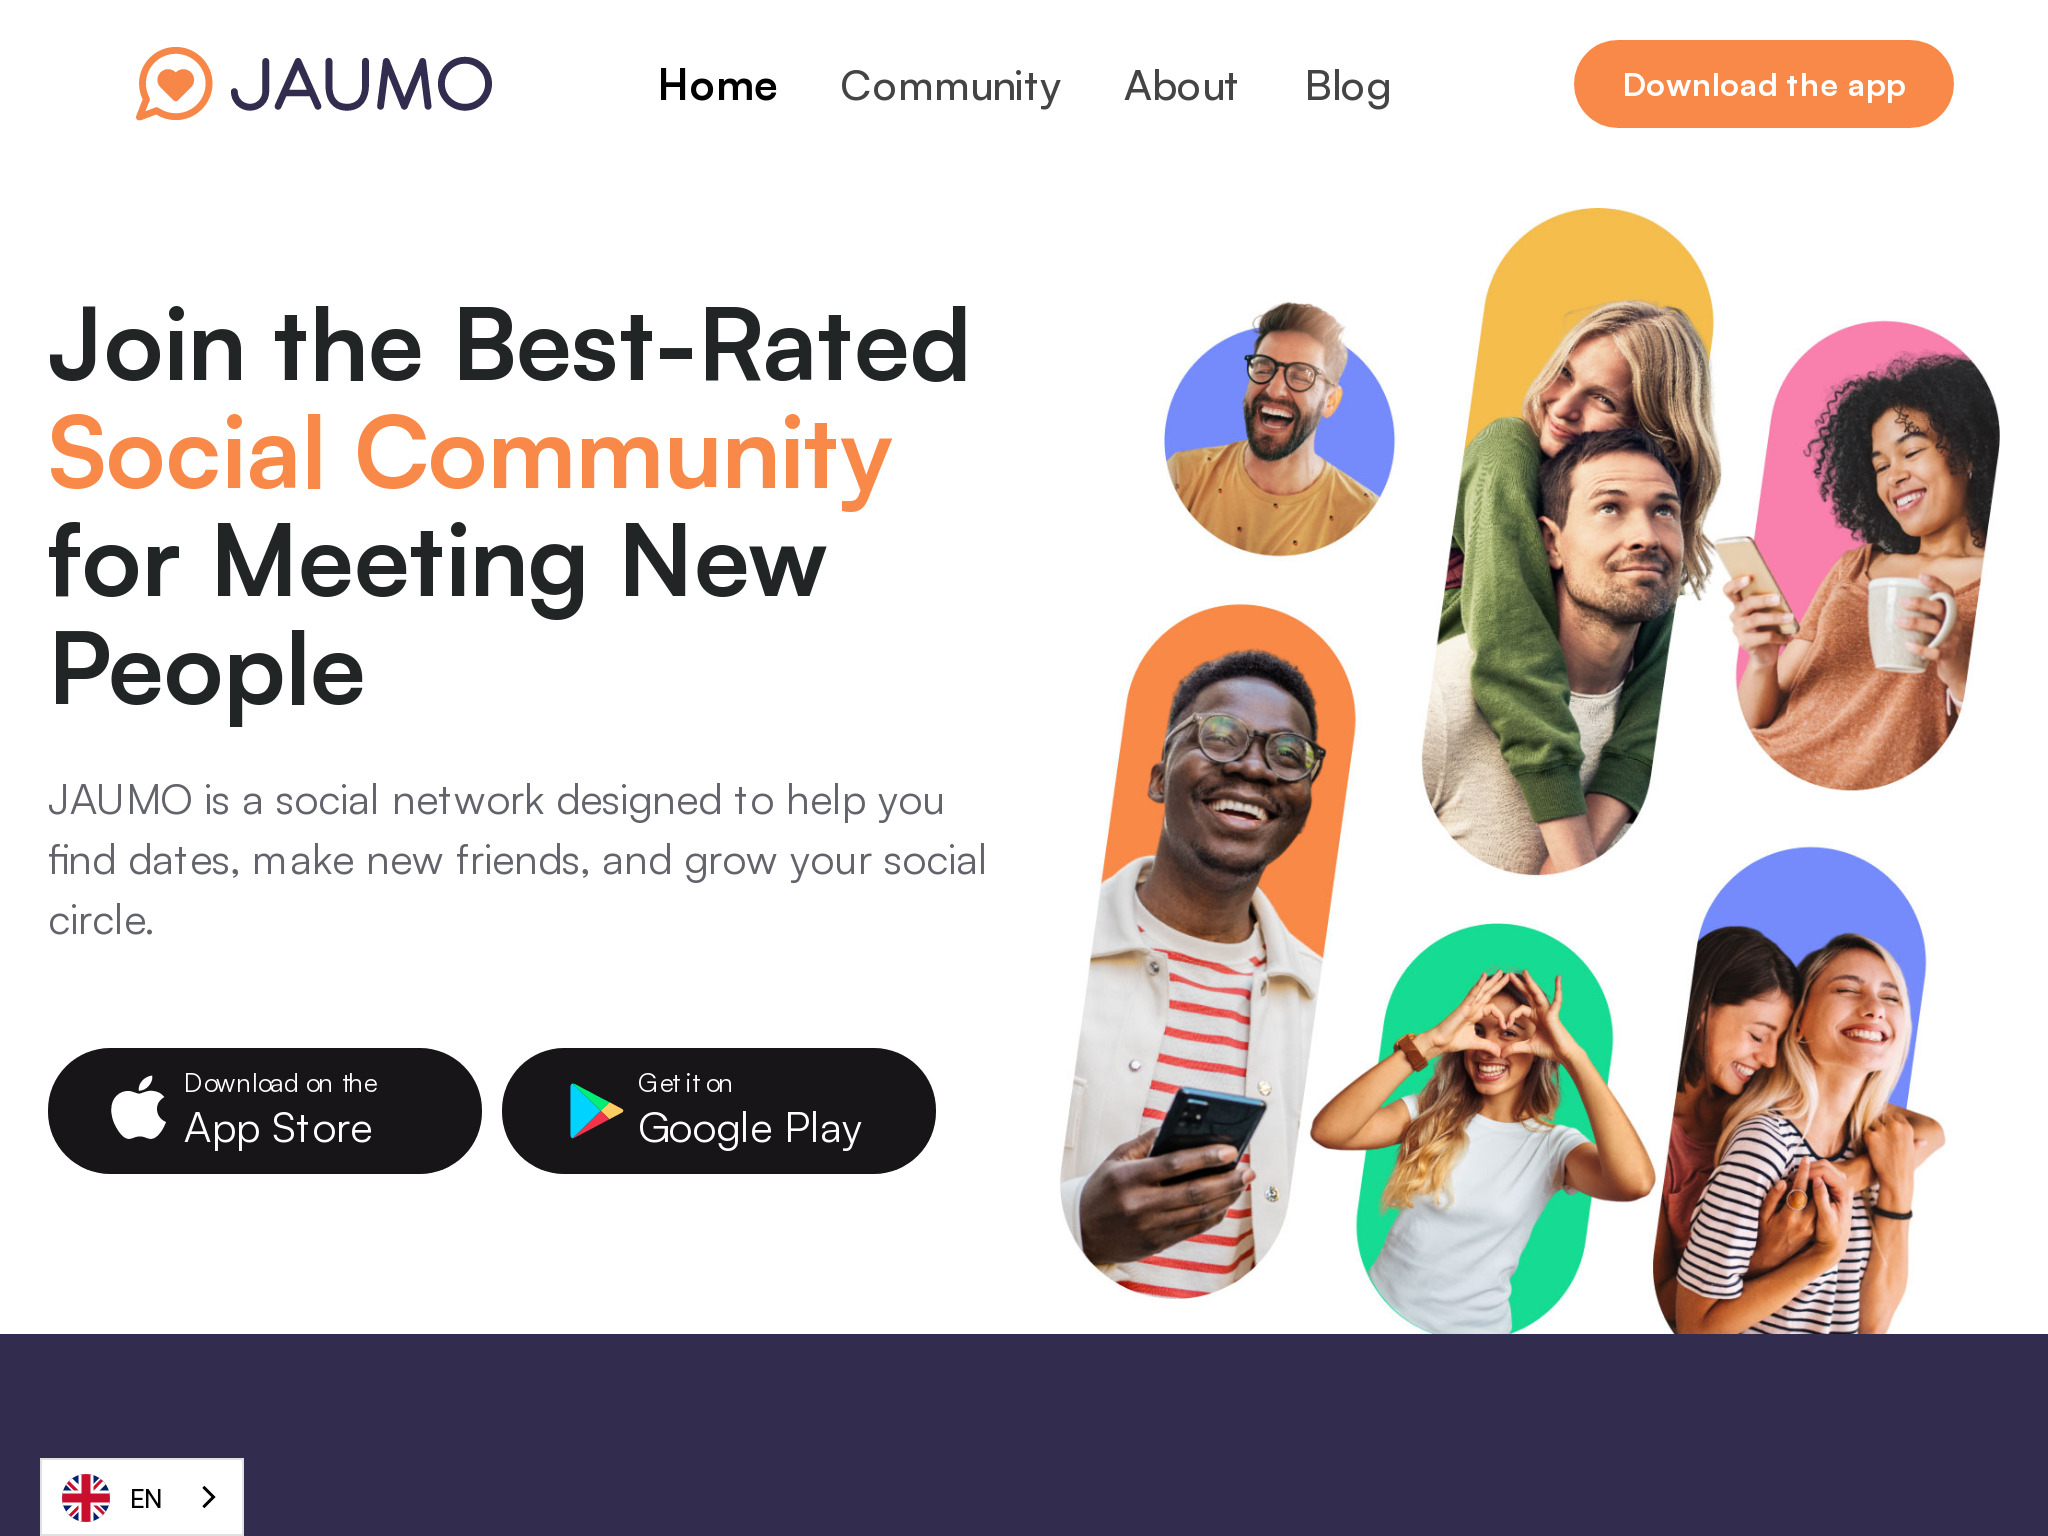 Jaumo Review: An In-Depth Look at the Online Dating Platform